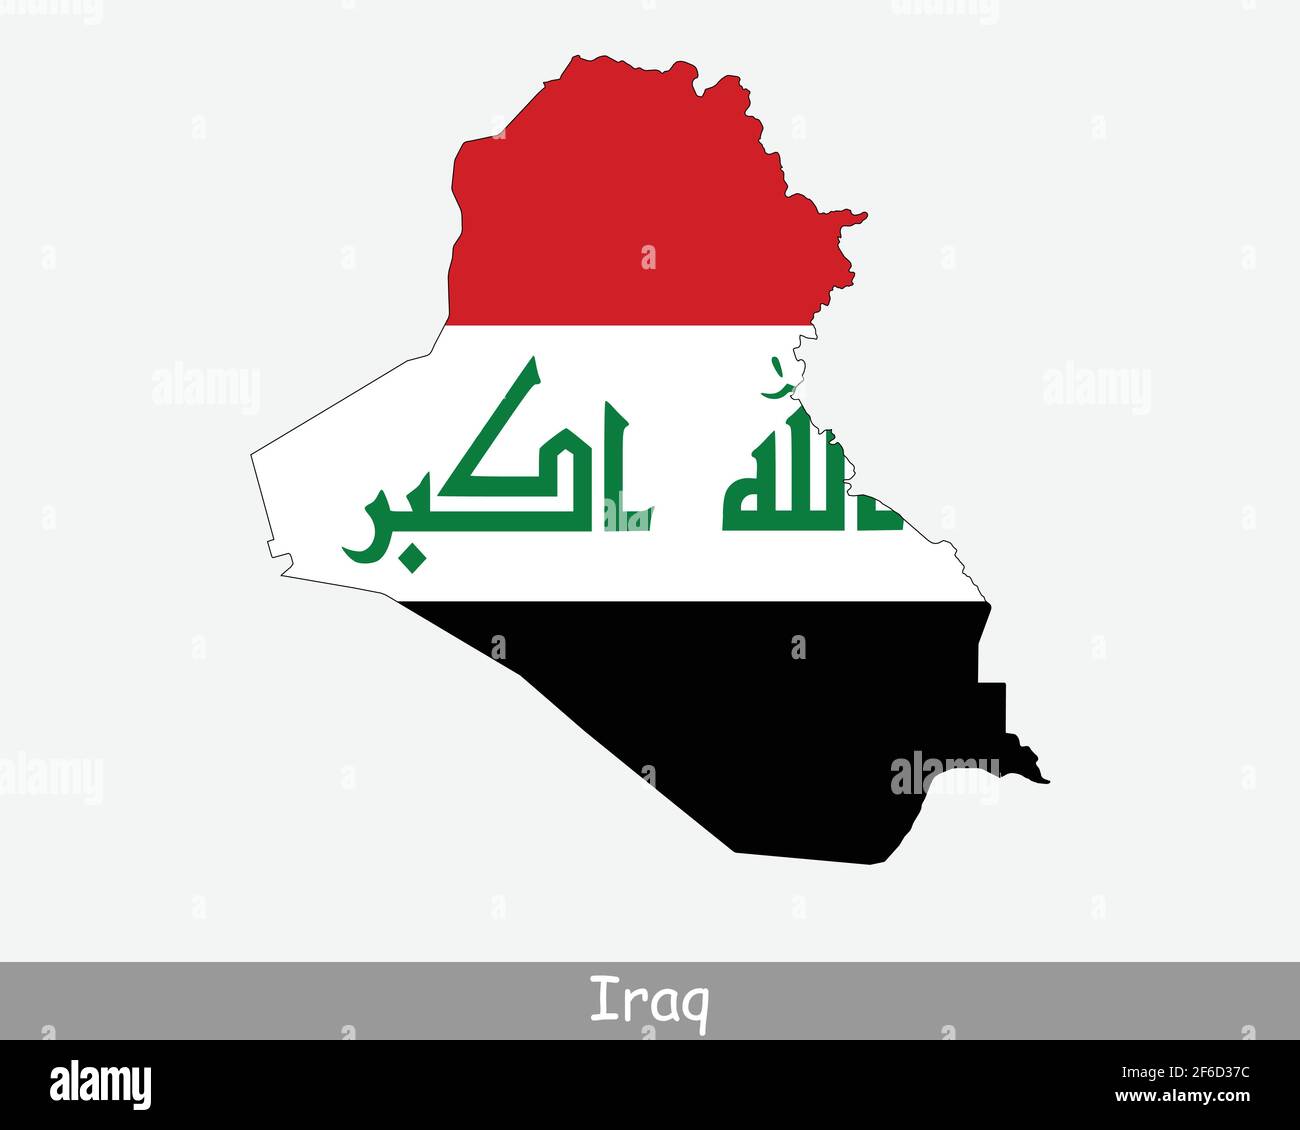 Iraq Map Flag. Map of the Republic of Iraq with the Iraqi national flag isolated on white background. Vector Illustration. Stock Vector